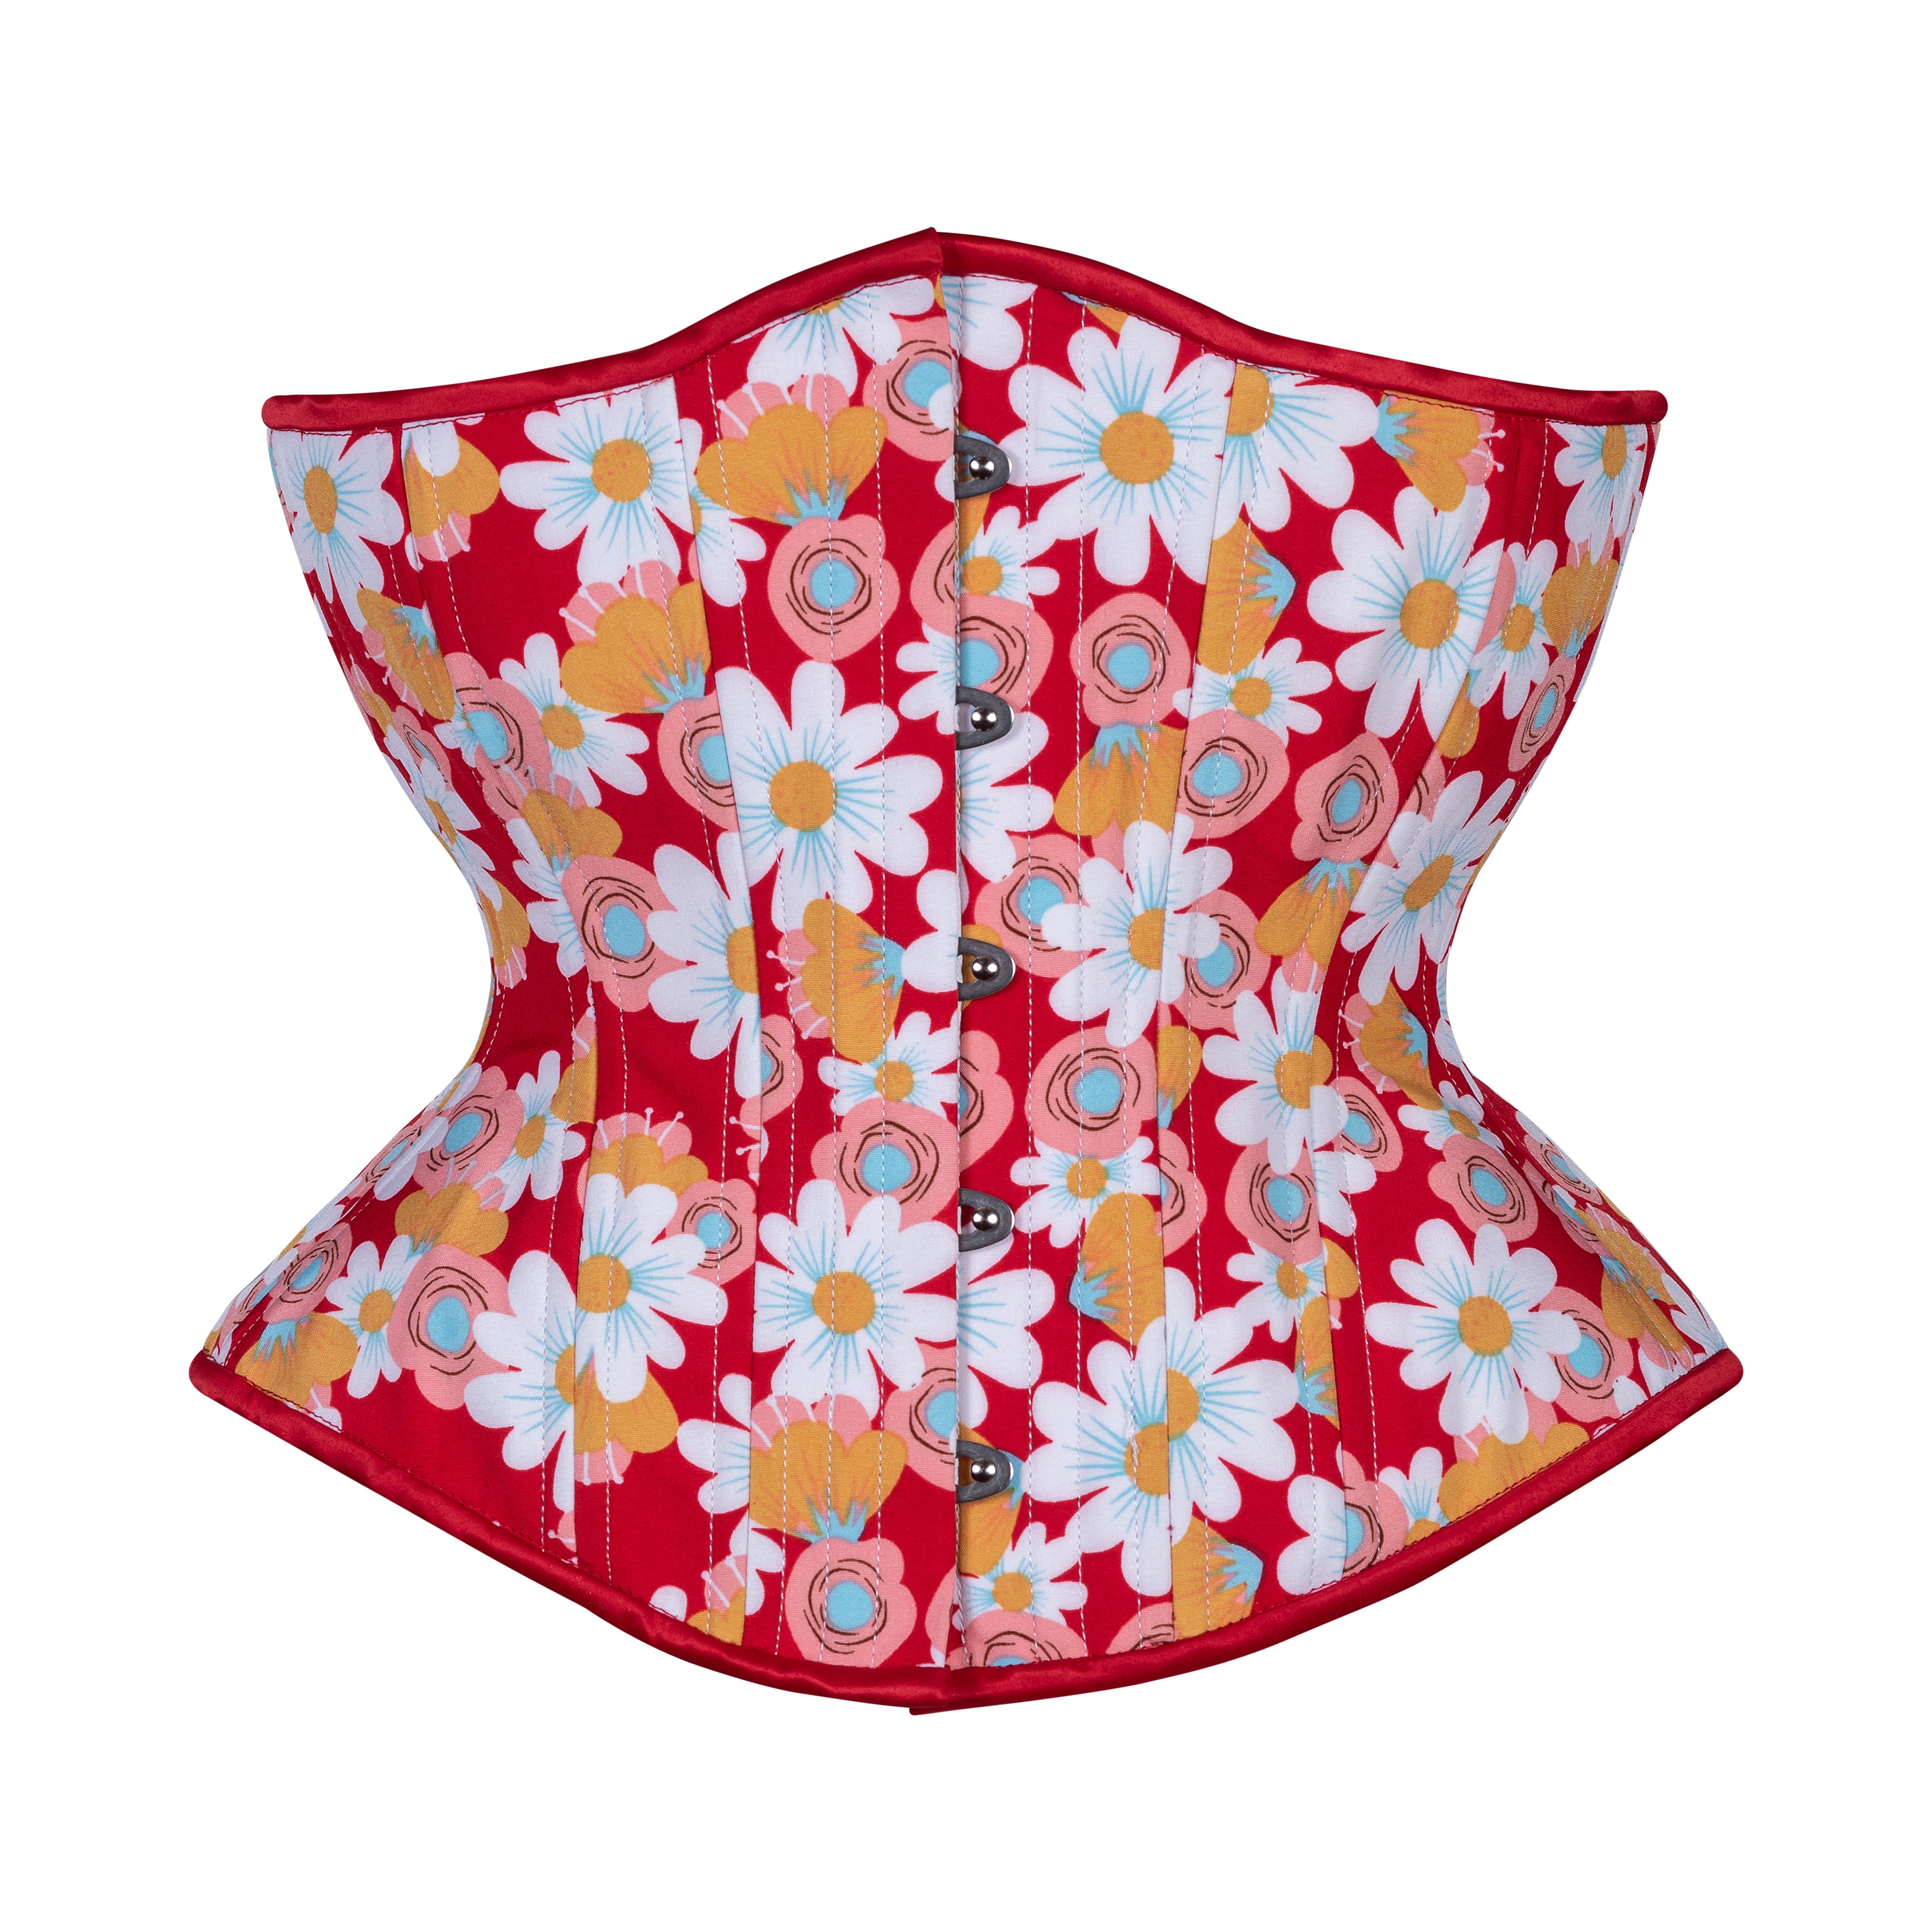 Vintage Daisies in Red Corset, Hourglass Silhouette, Regular